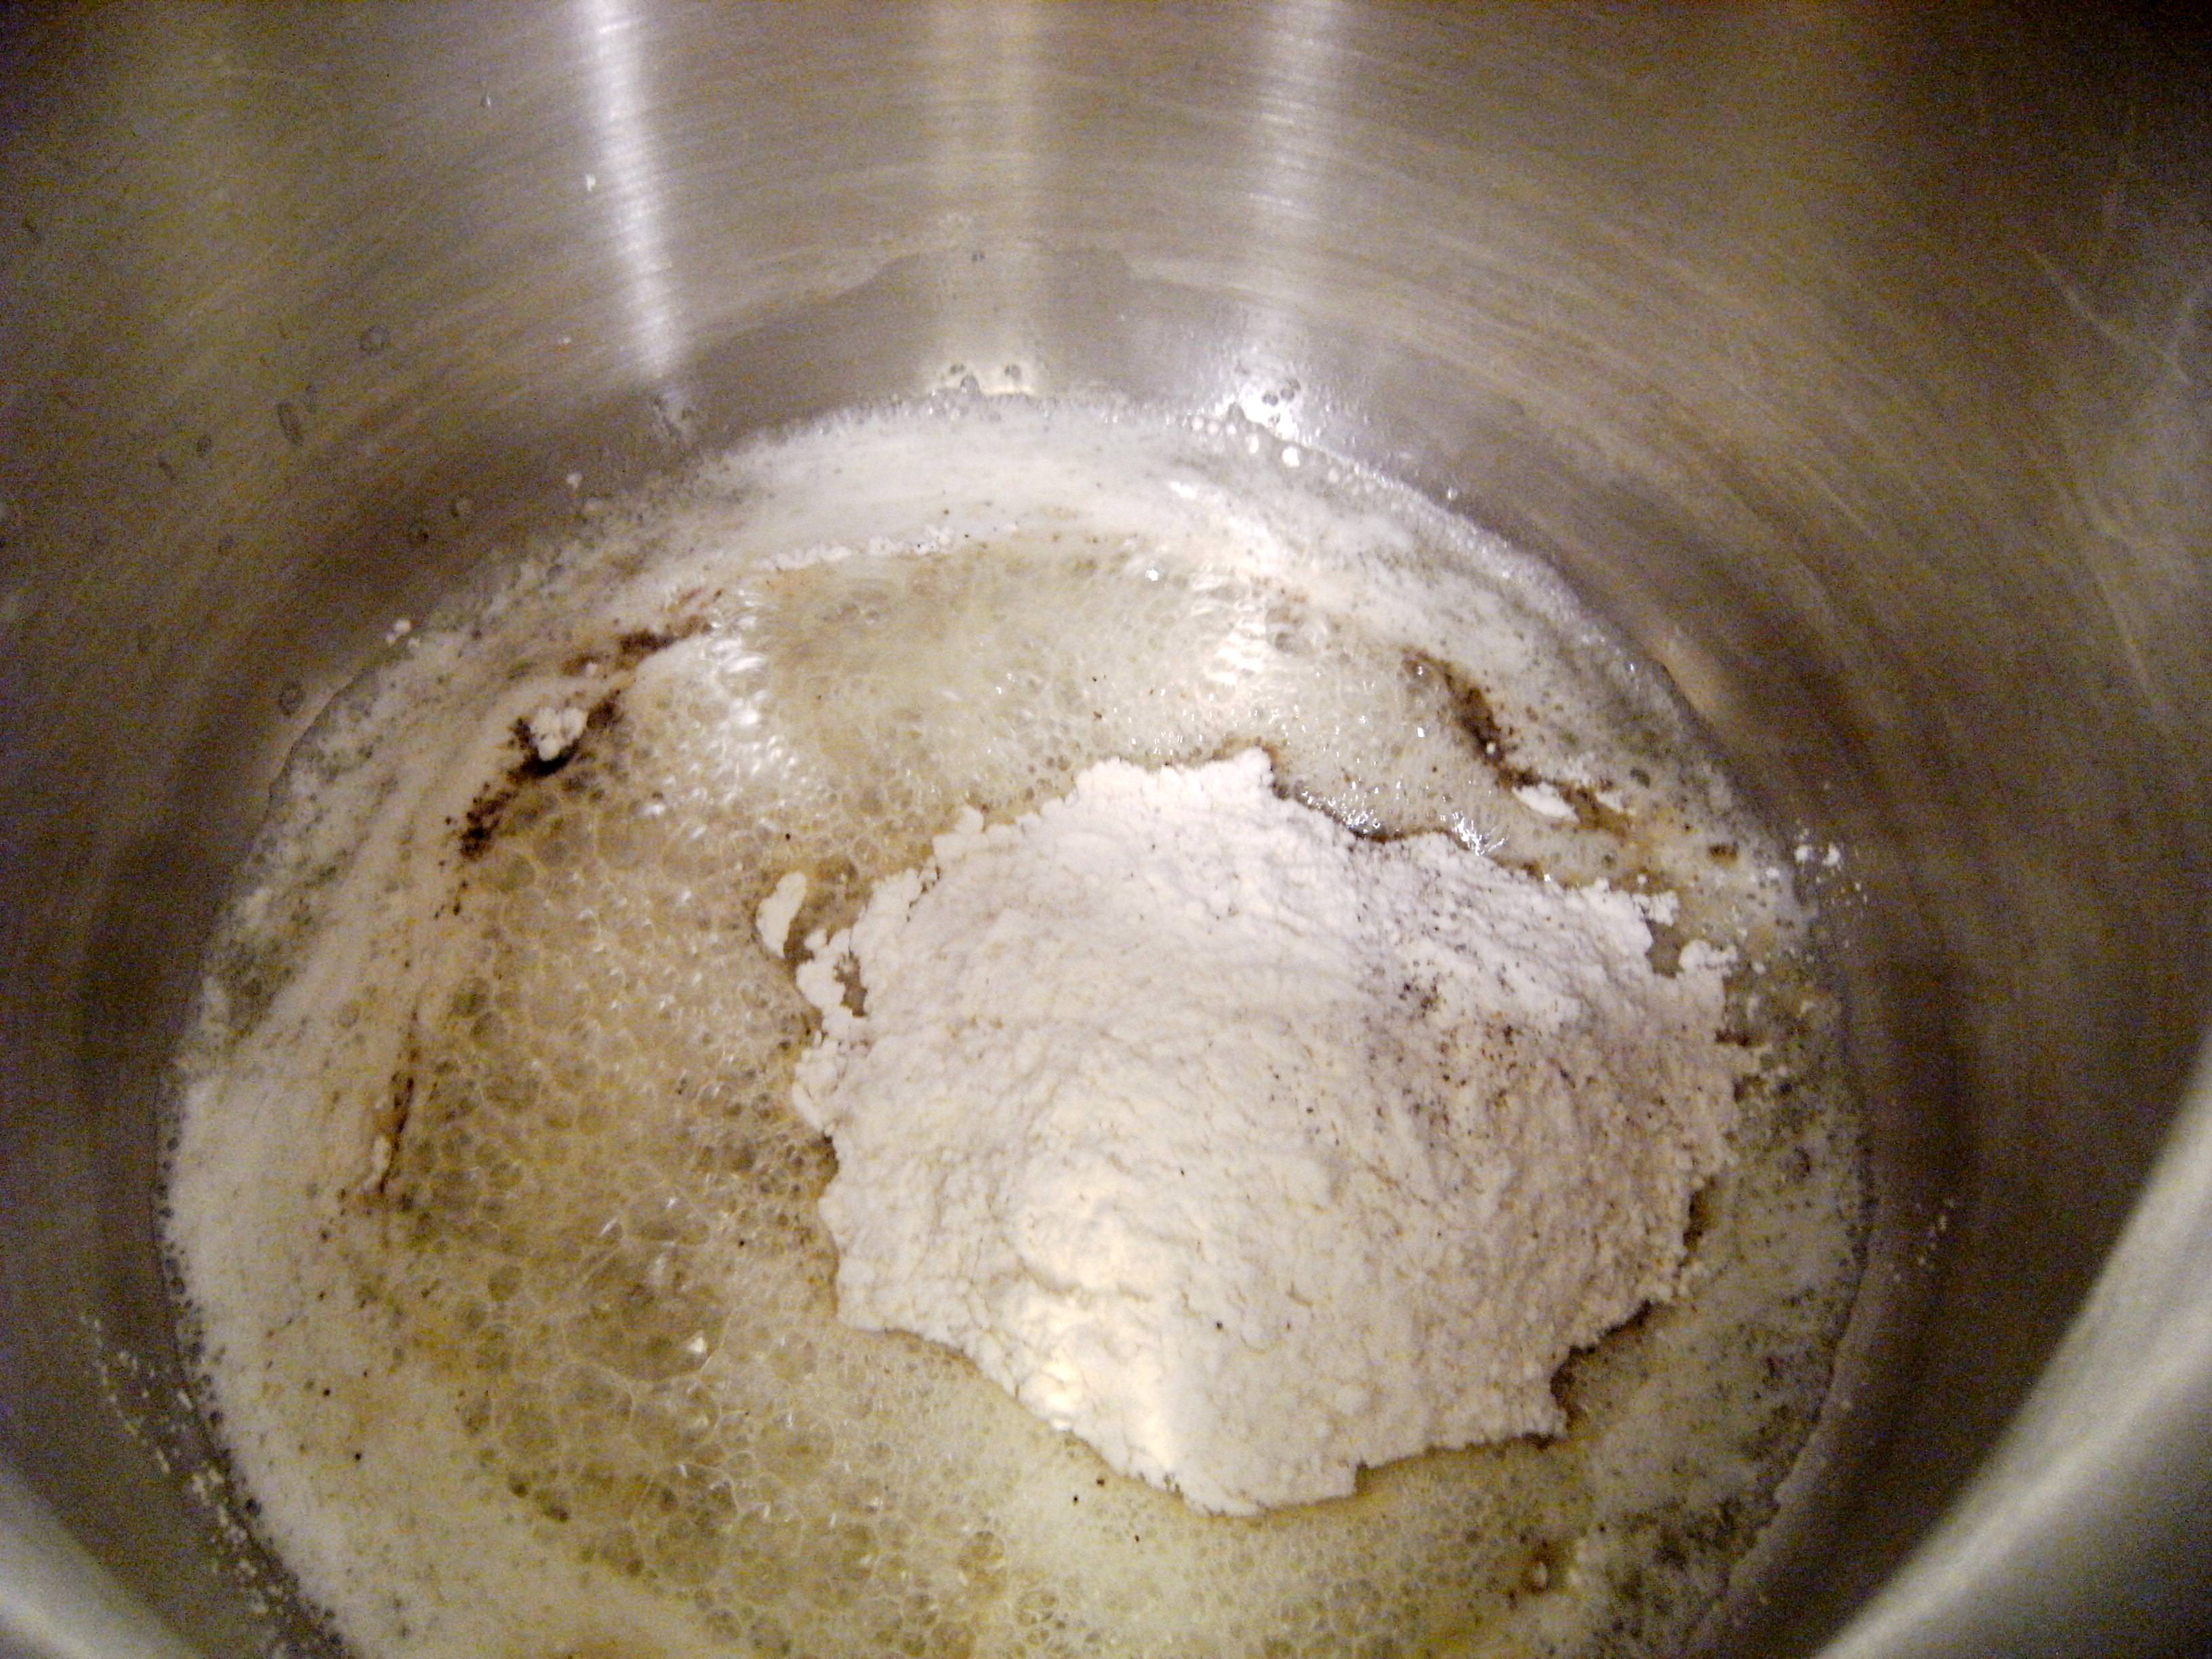 Equal parts (by weight) of fat and flour make a roux